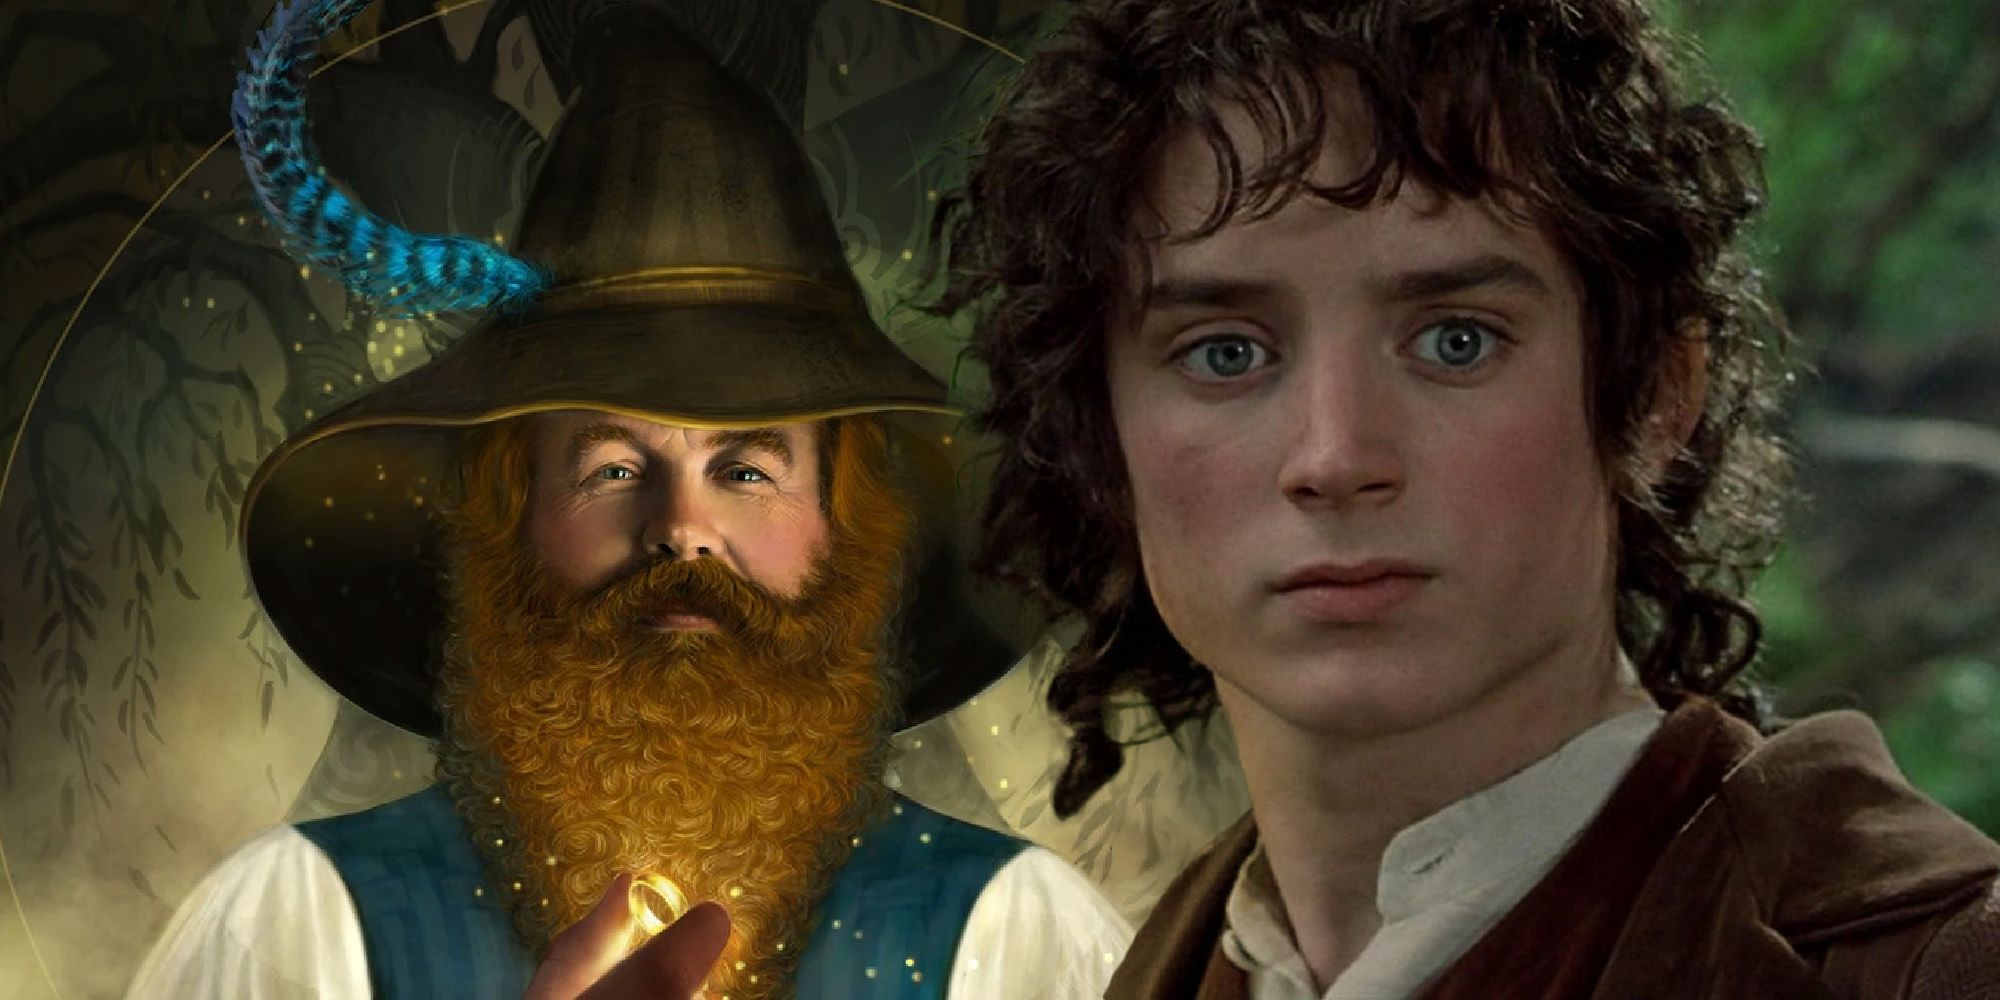 Blended image of Frodo and Tom Bombadil.